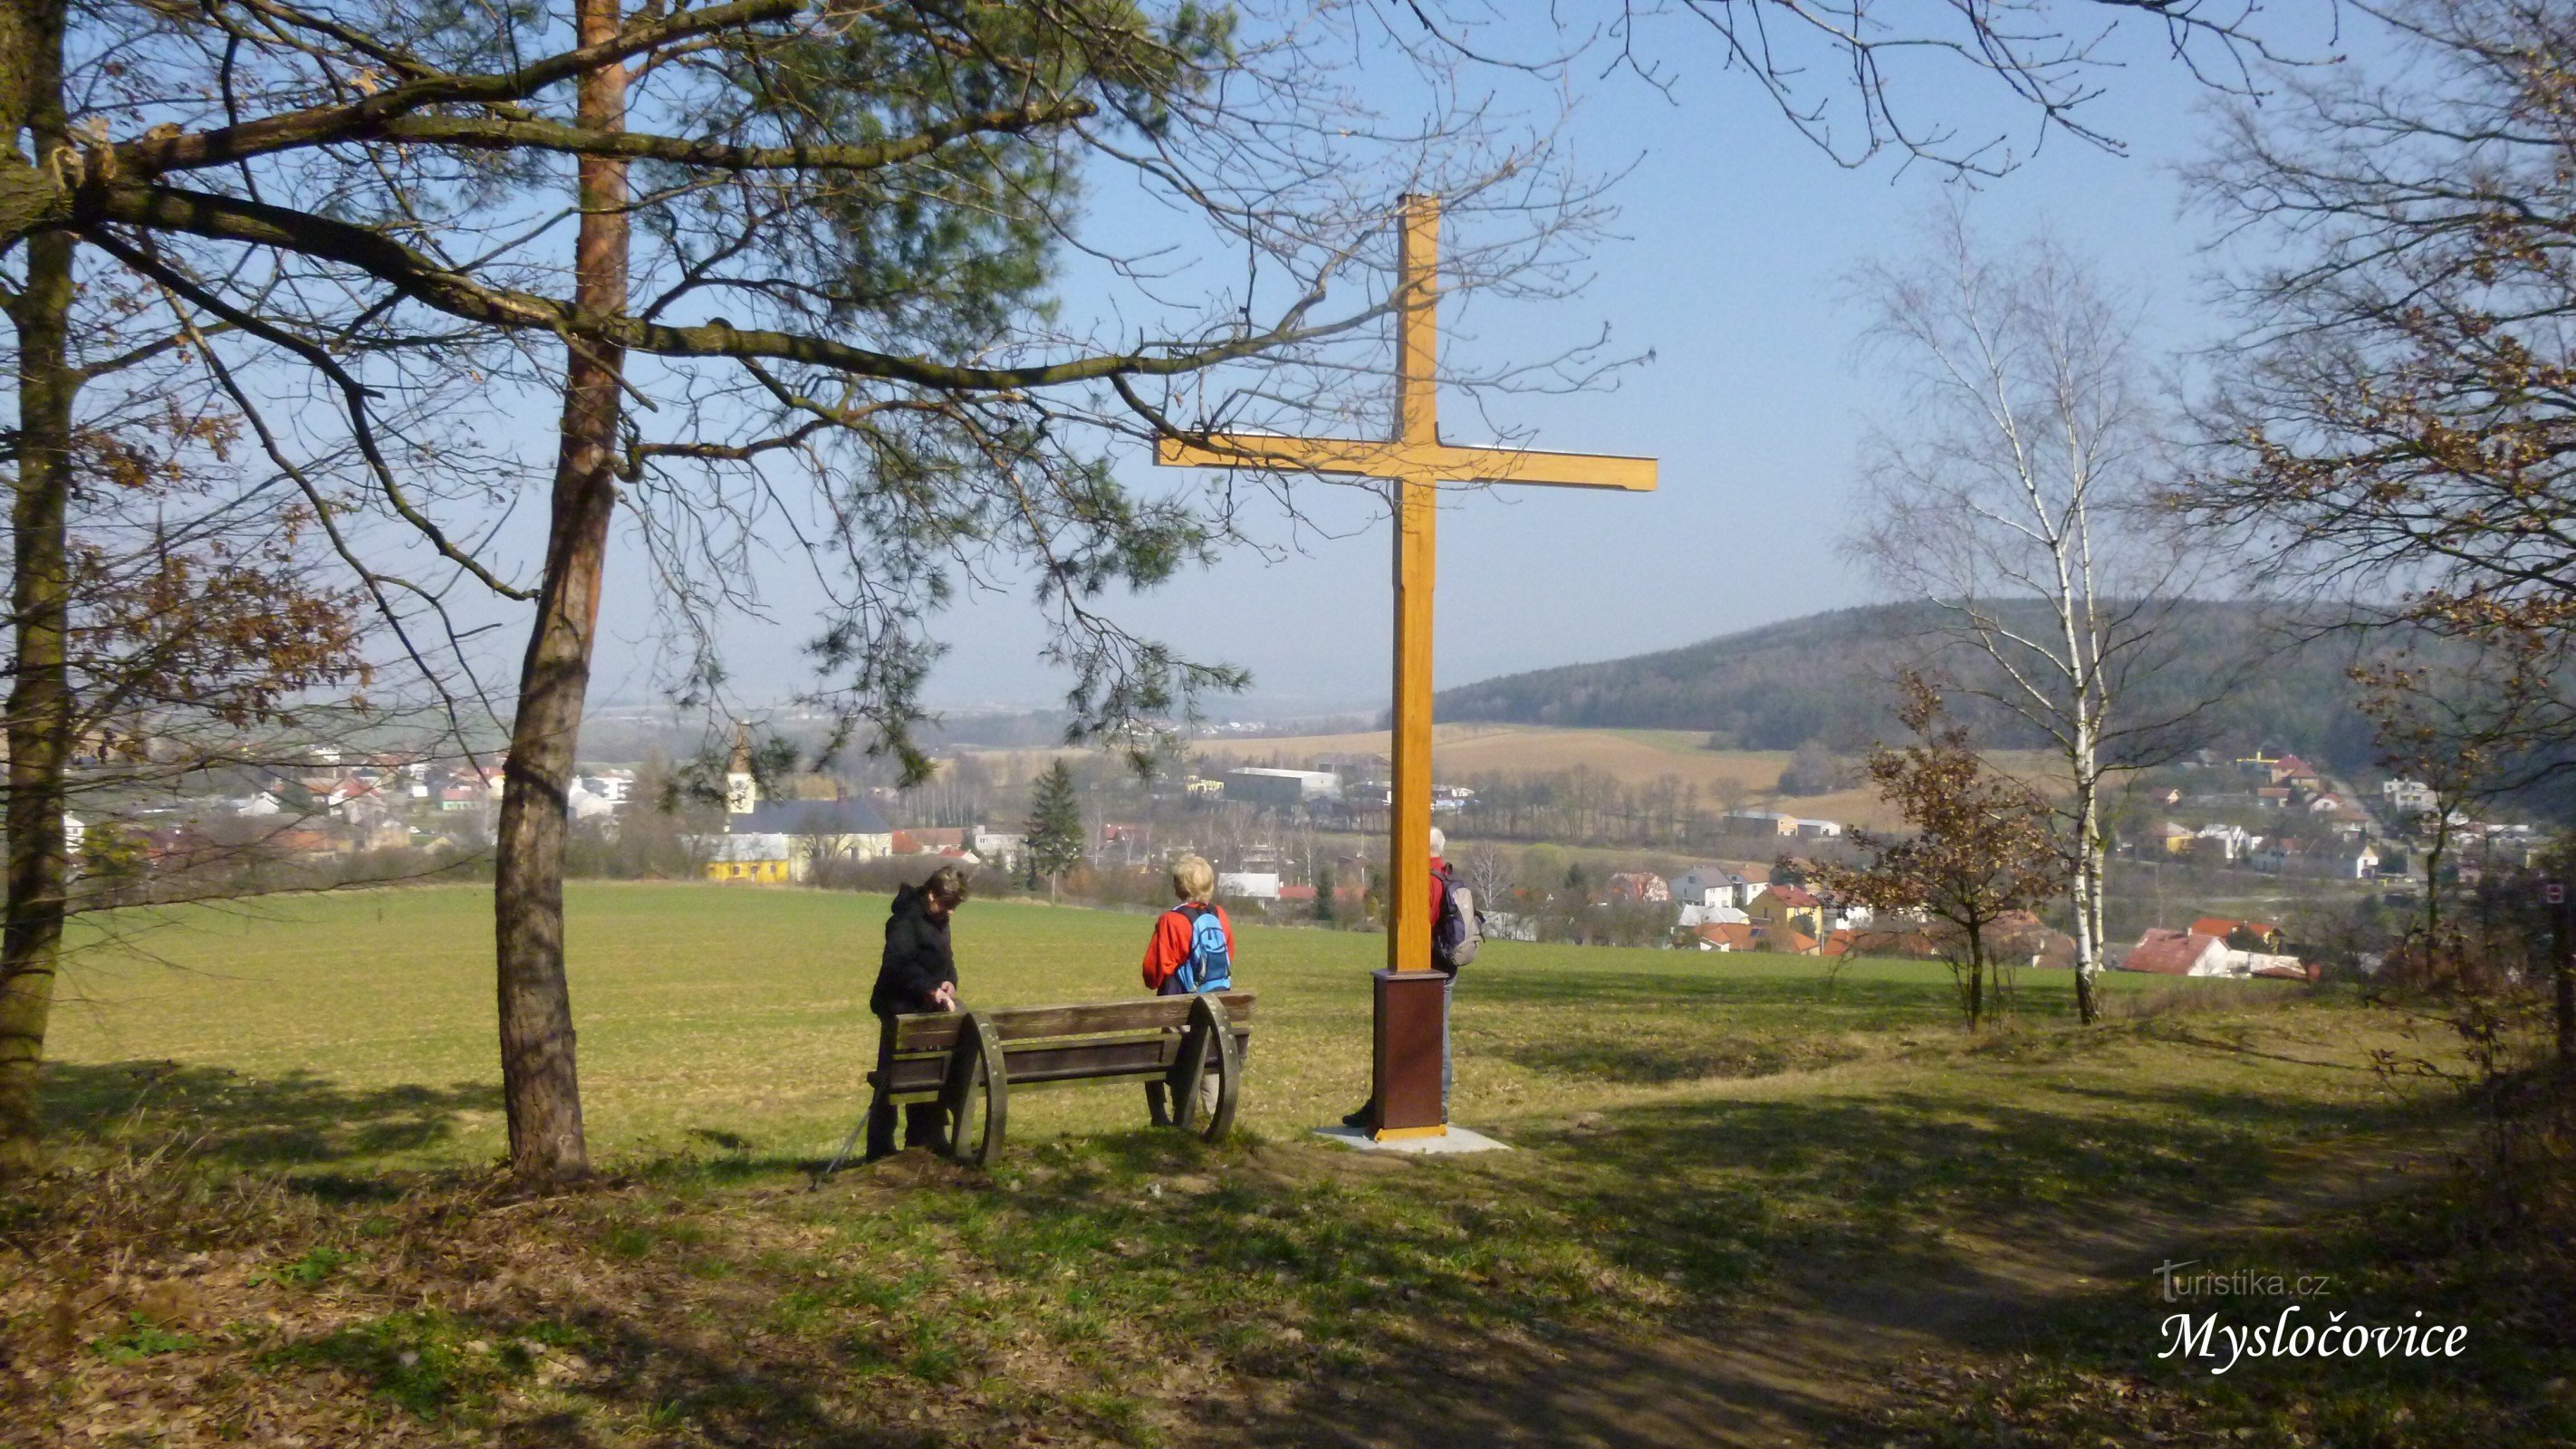 A wonderful place with a view over Mysločovice